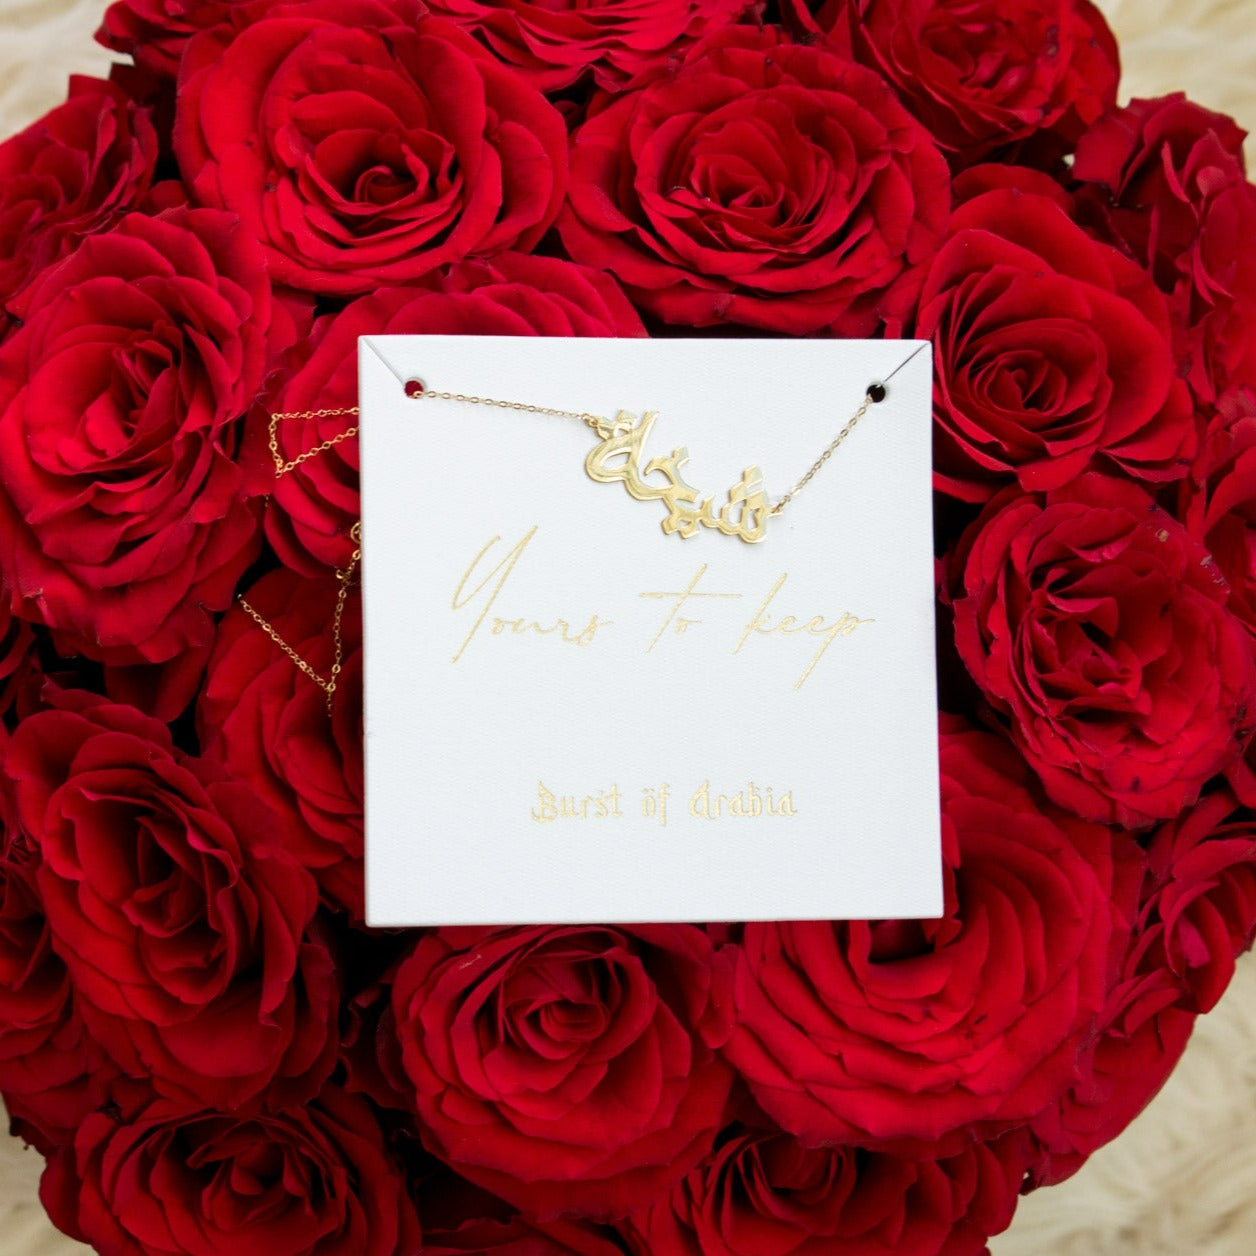 Surprise your loved ones with our Gold Personalized Name Necklace. Handcrafted in the UAE with premium materials and skilled artisans, this classic necklace makes the perfect gift for your best friend, significant other, or family member. Show them how much you care with this beautifully designed and locally made piece.